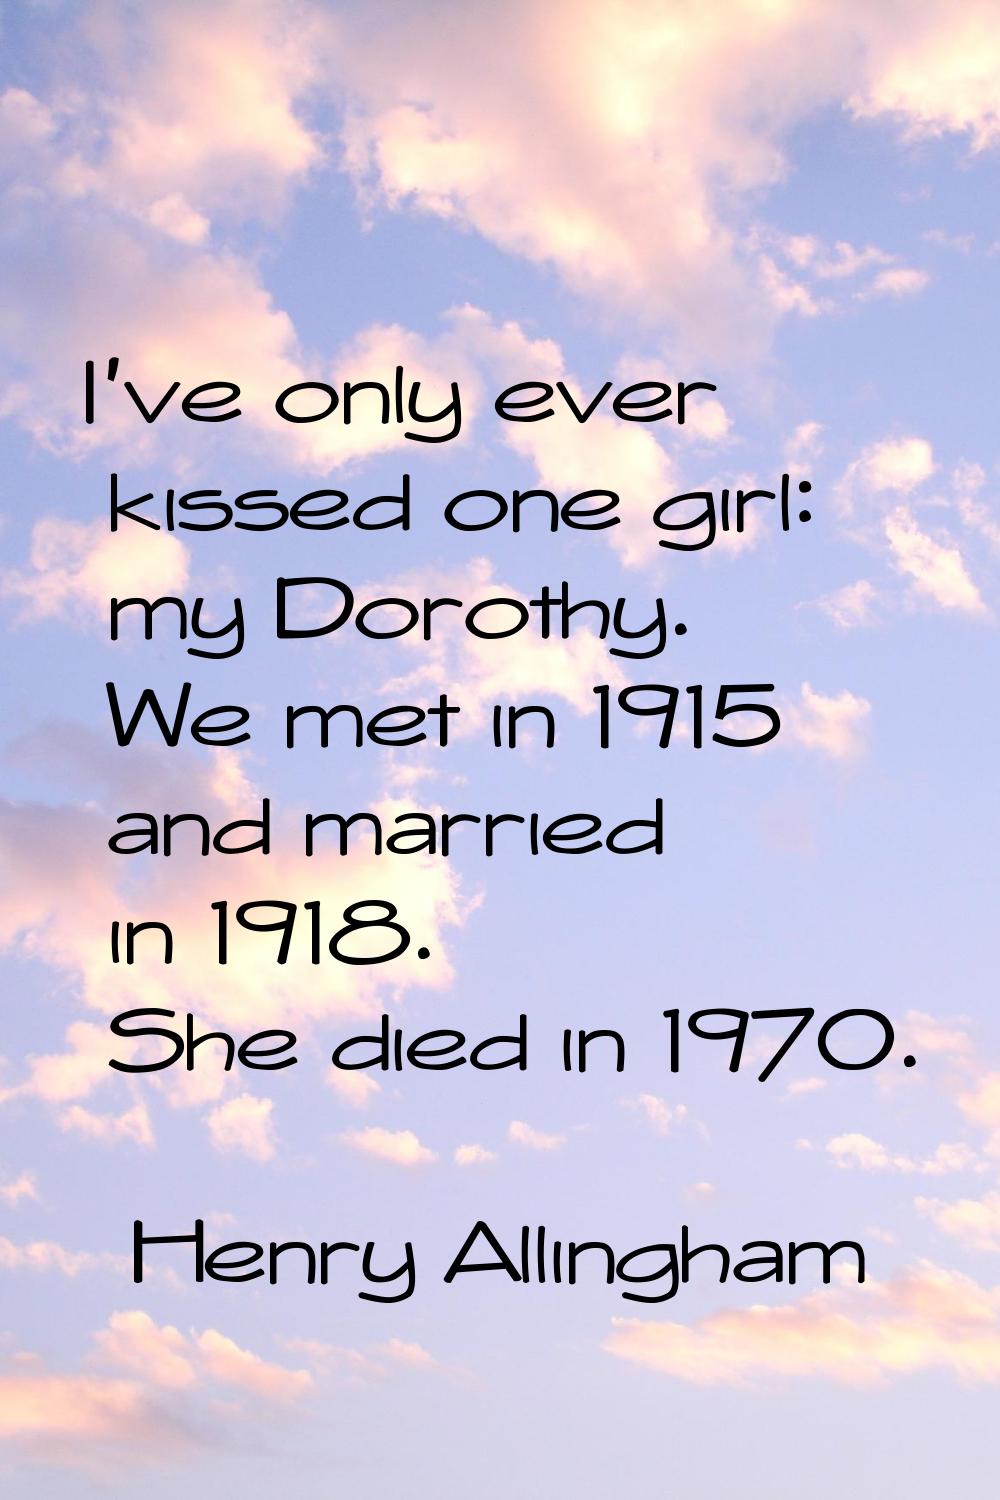 I've only ever kissed one girl: my Dorothy. We met in 1915 and married in 1918. She died in 1970.